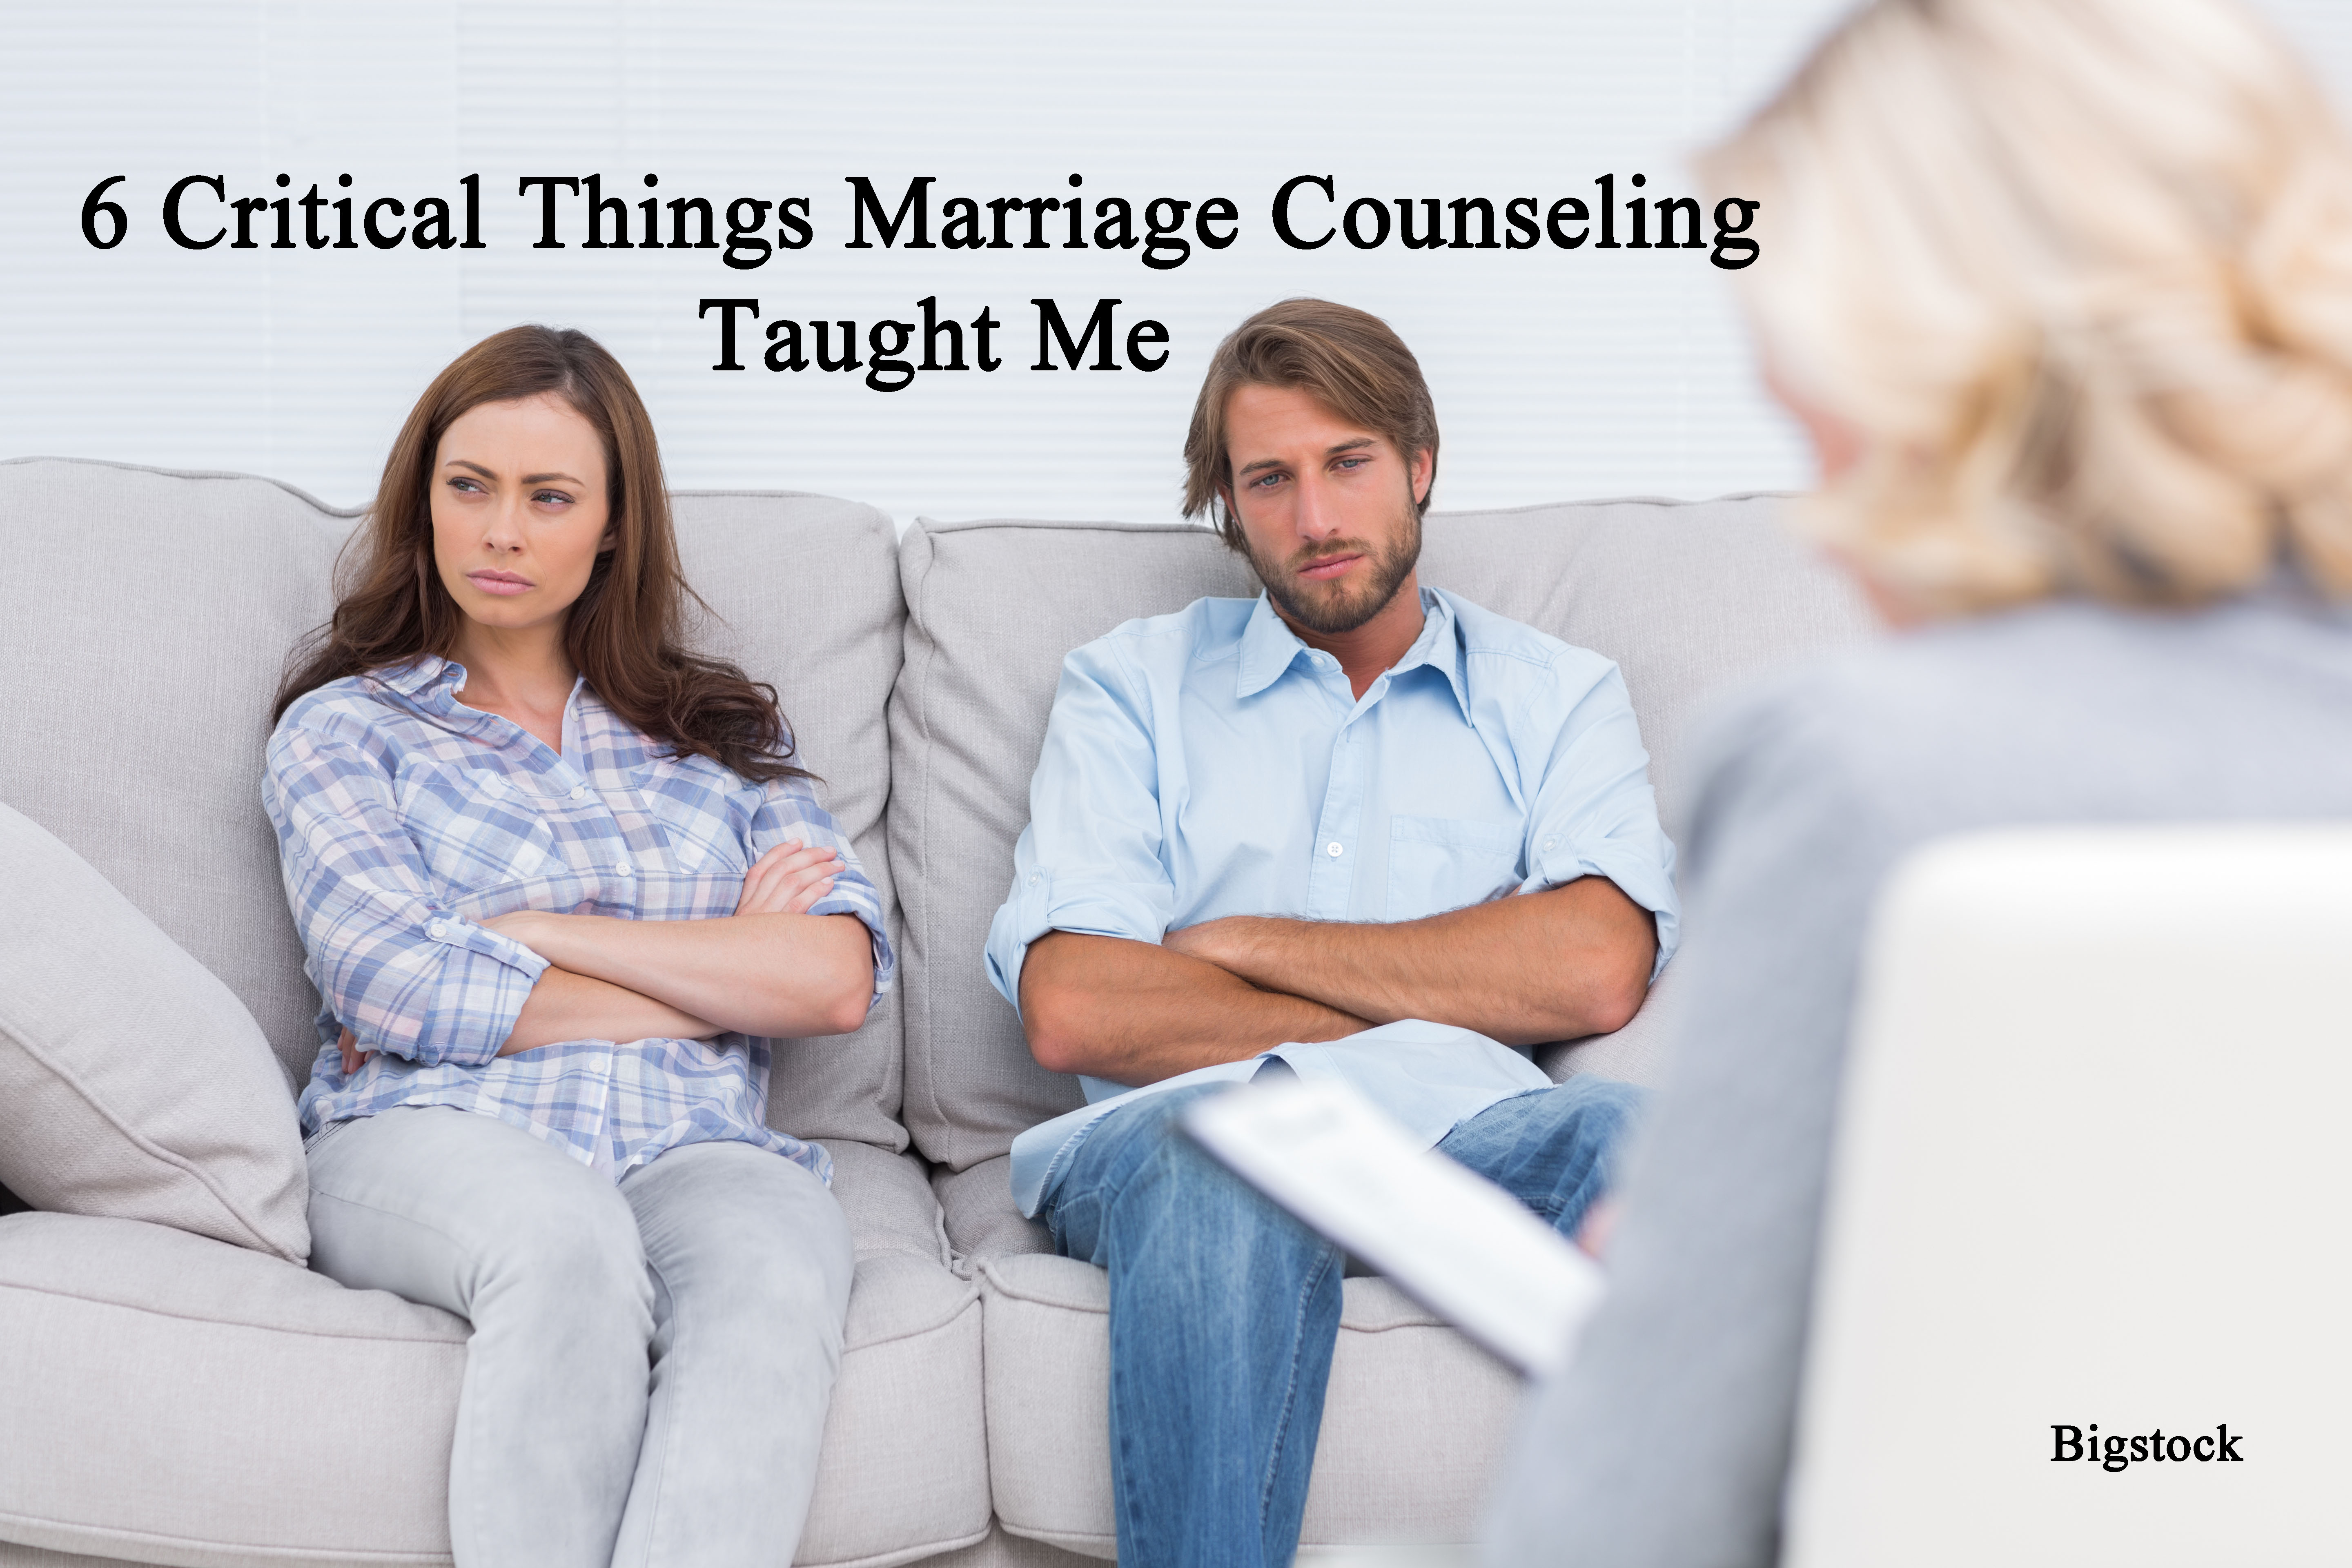 Intensive Marriage Counseling Retreats